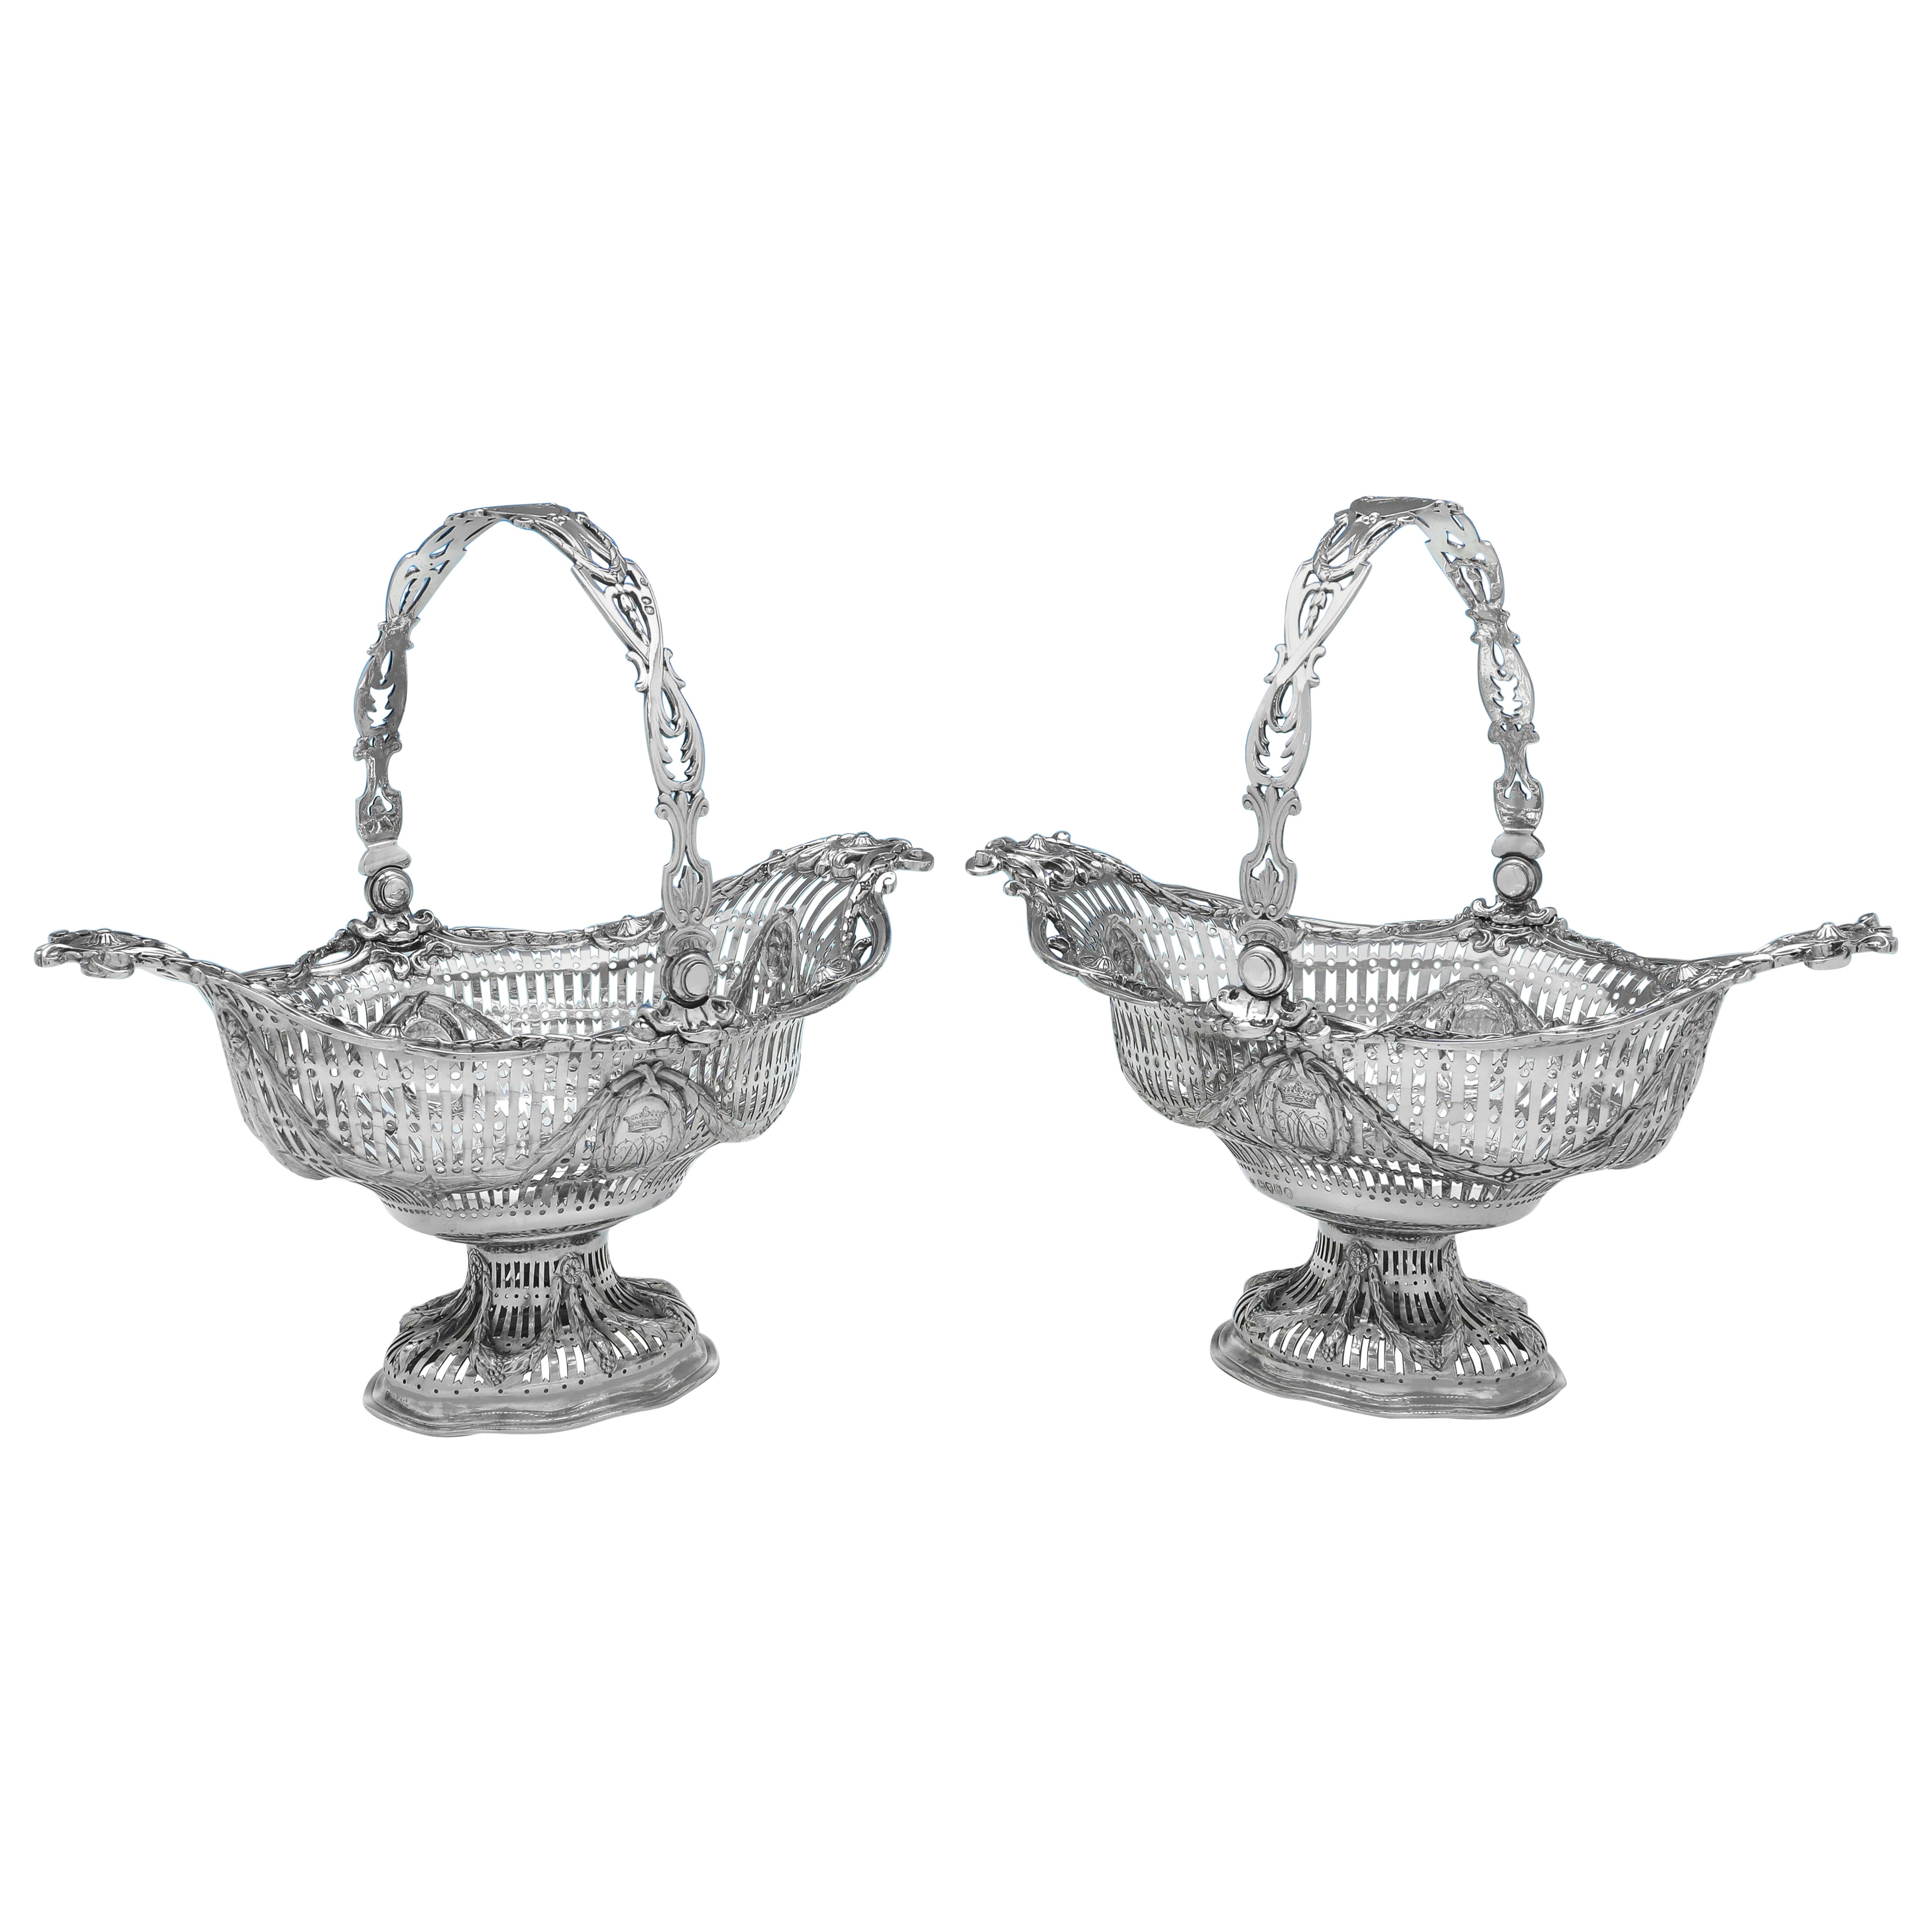 Very attractive pair of antique sterling silver baskets - George Fox London 1882 For Sale